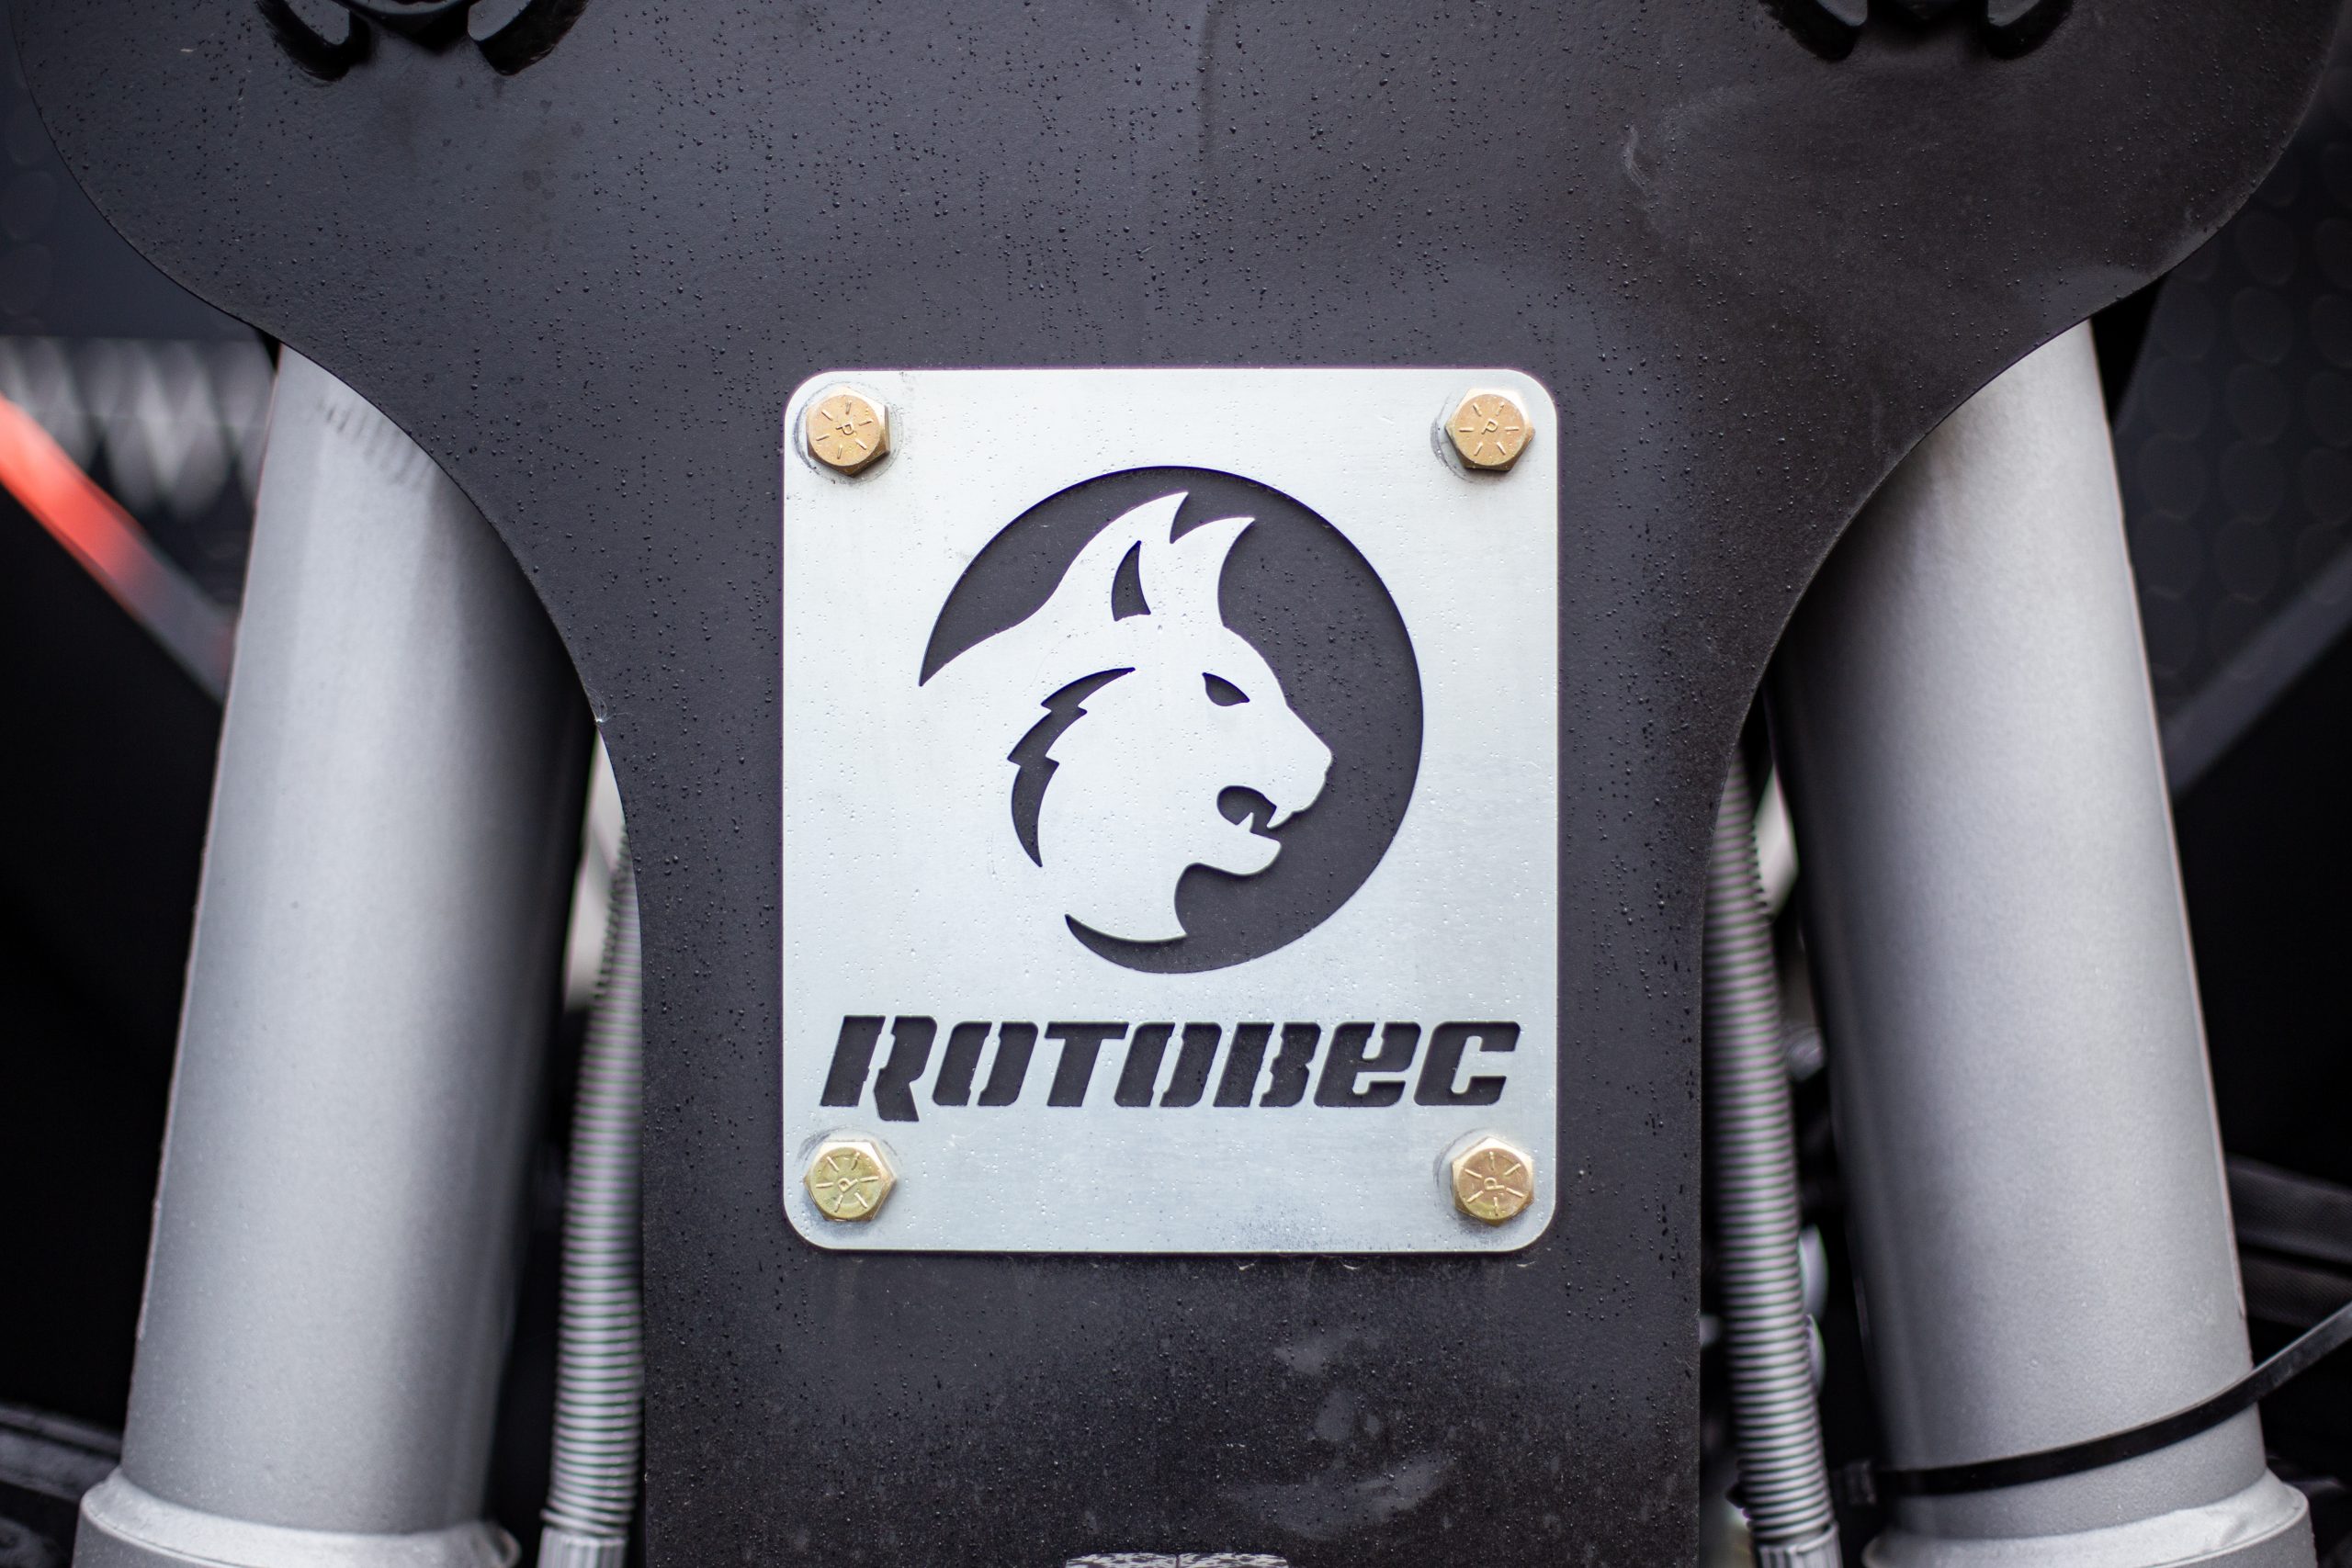 High-quality steel and component grapple with the Rotobec logo.